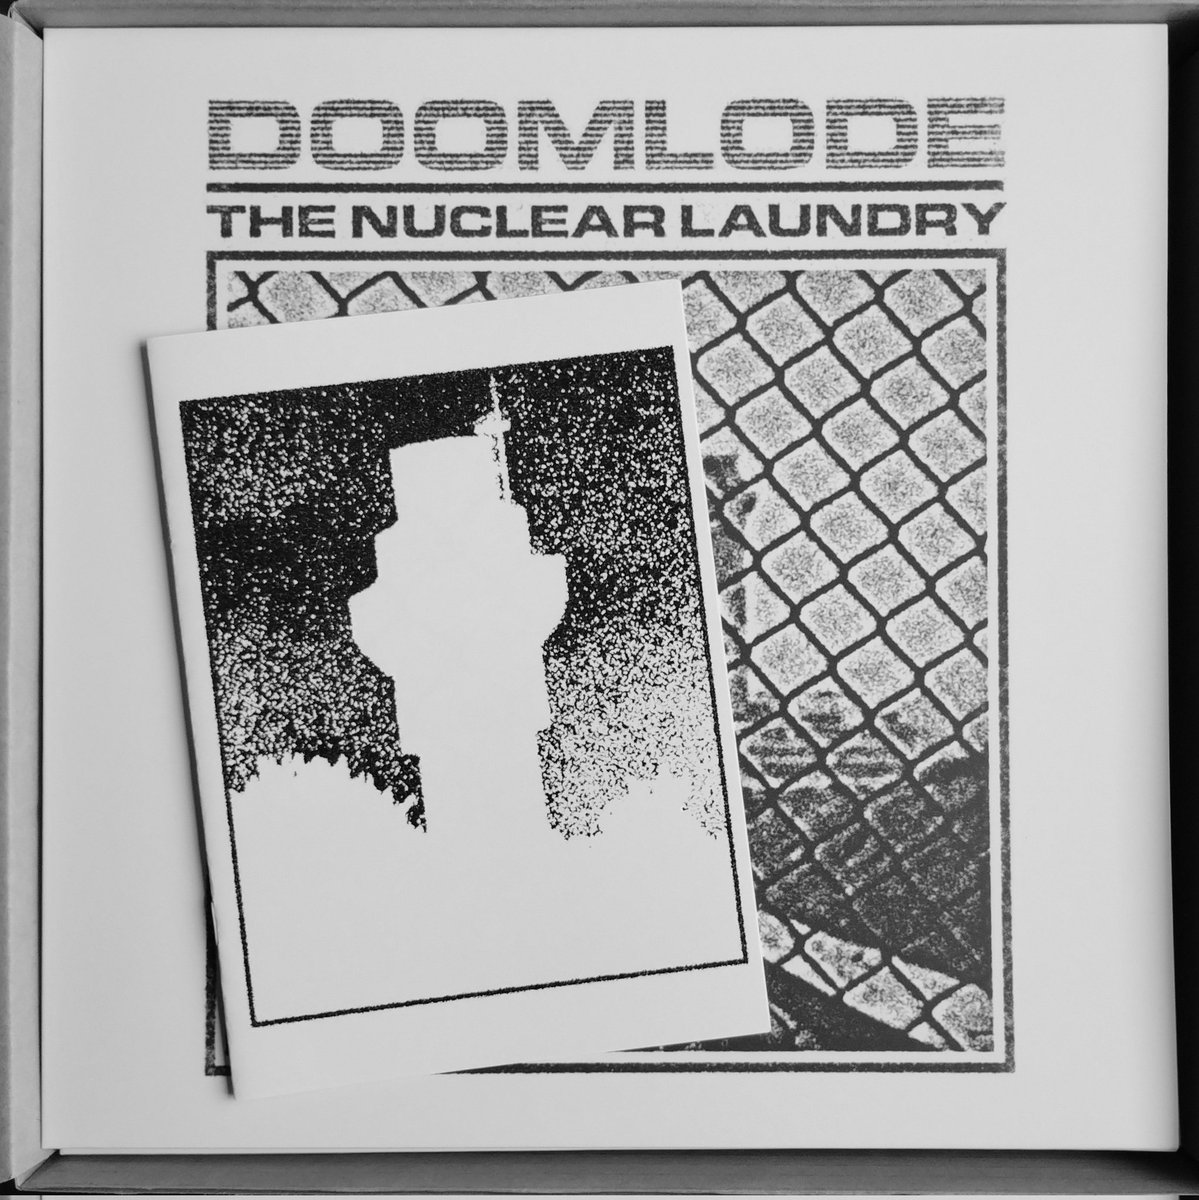 'The Nuclear Laundry' LPs will be sent out this coming week. Copies are still available on Bandcamp and via @bleep. Thanks everyone 🩶 doomlode.bandcamp.com/album/the-nucl…